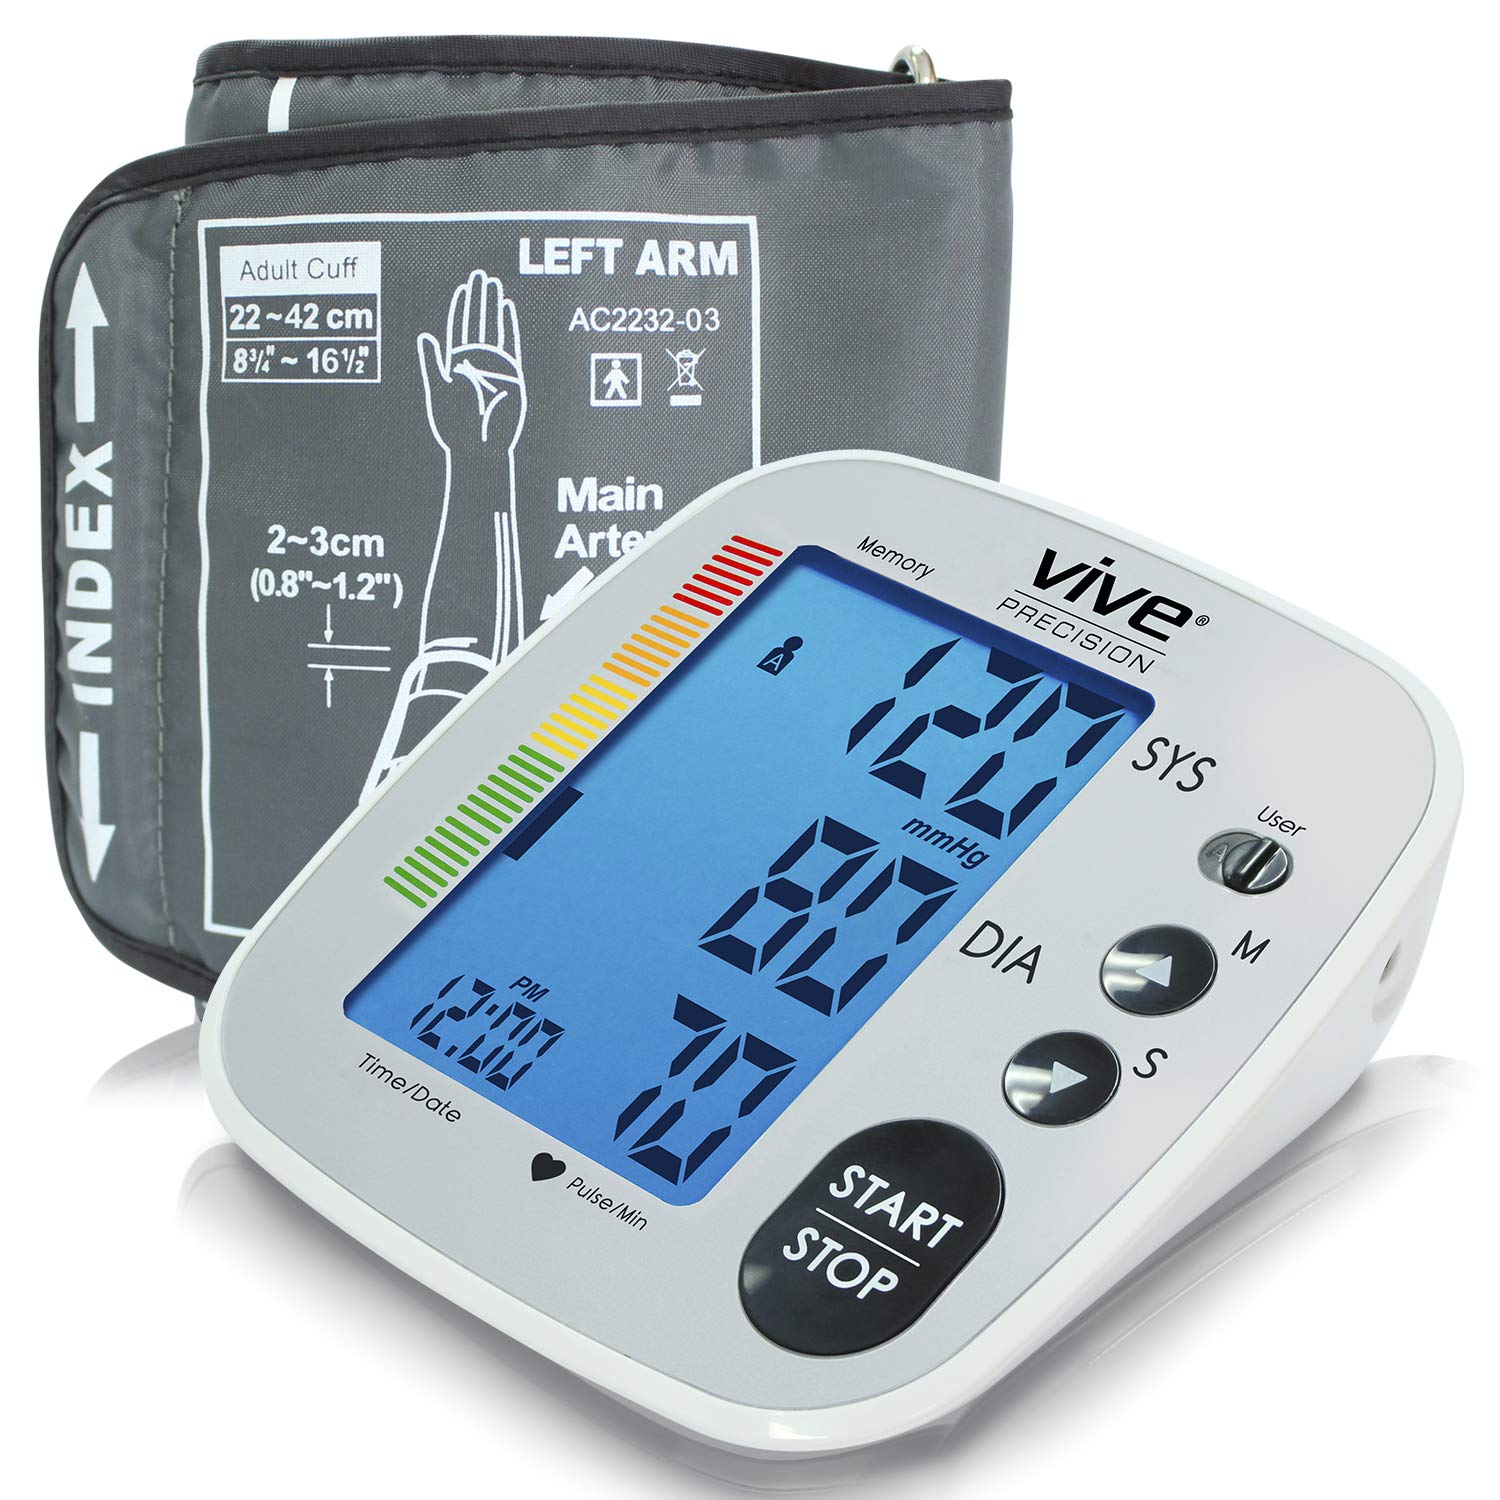 https://www.dontwasteyourmoney.com/wp-content/uploads/2020/03/vive-precision-automatic-blood-pressure-cuff-blood-pressure-monitor-for-home-use.jpg